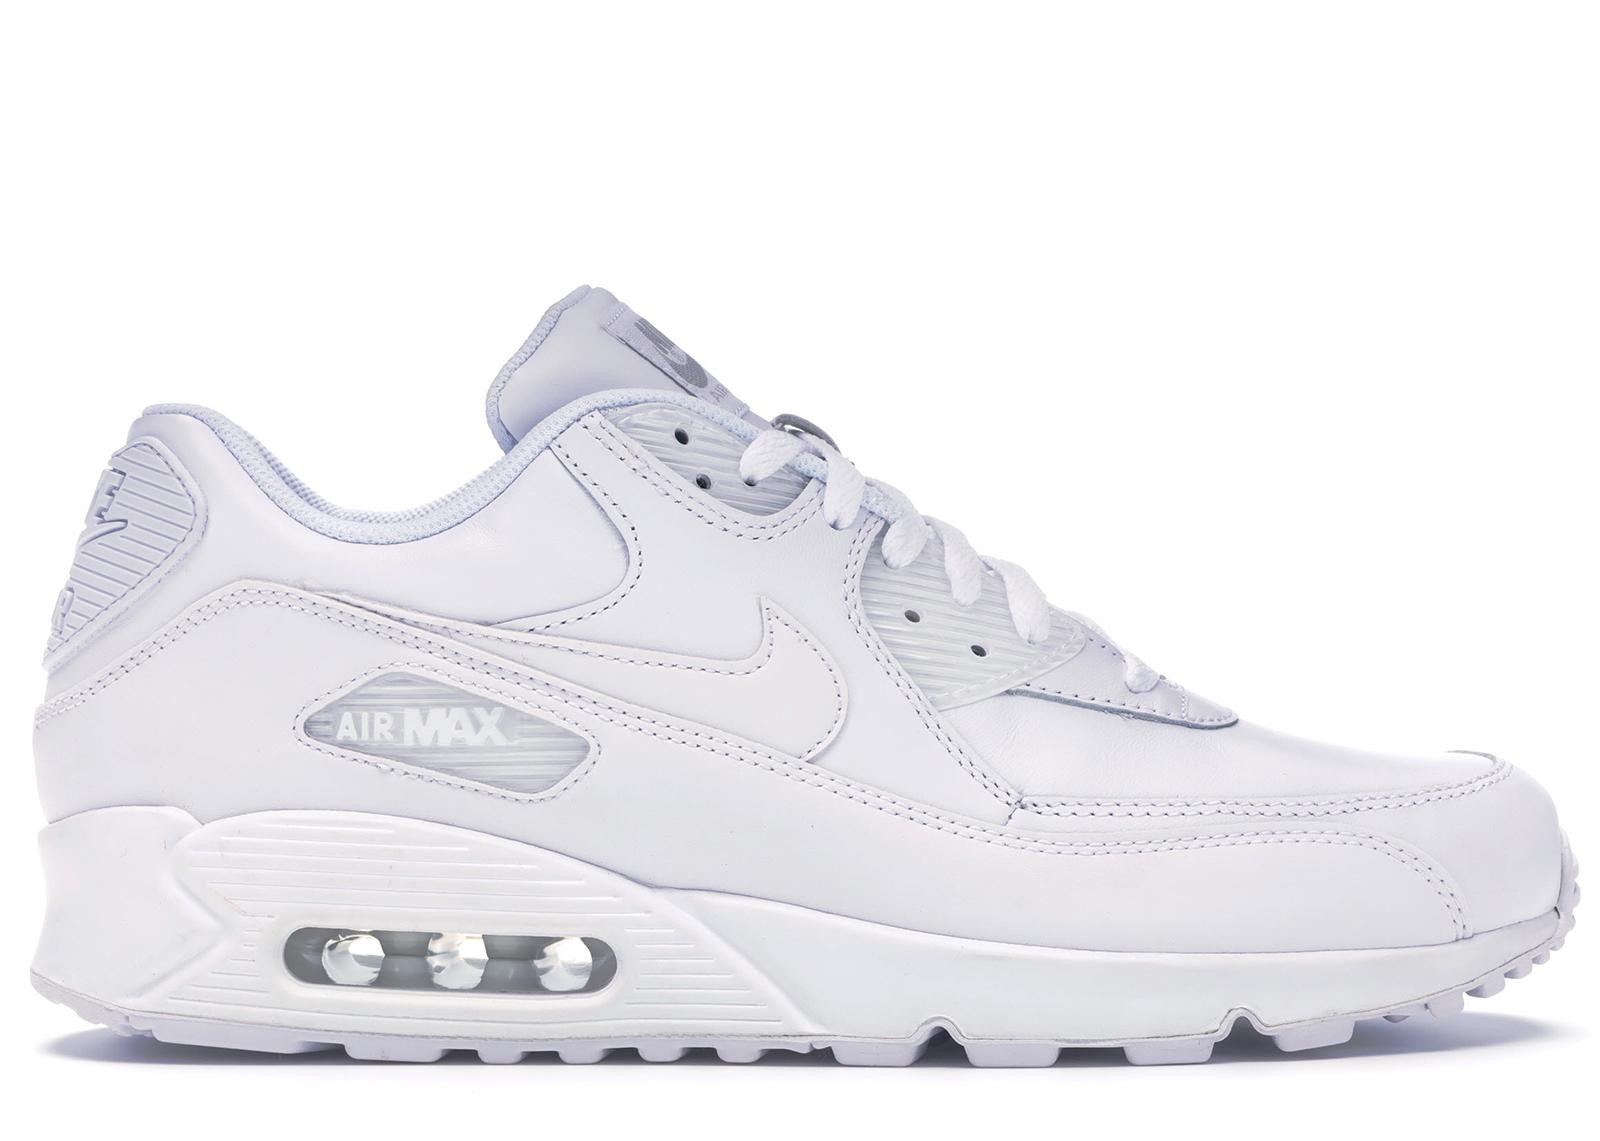 Nike Air Max 90 Leather in White/White (White) for Men - Lyst